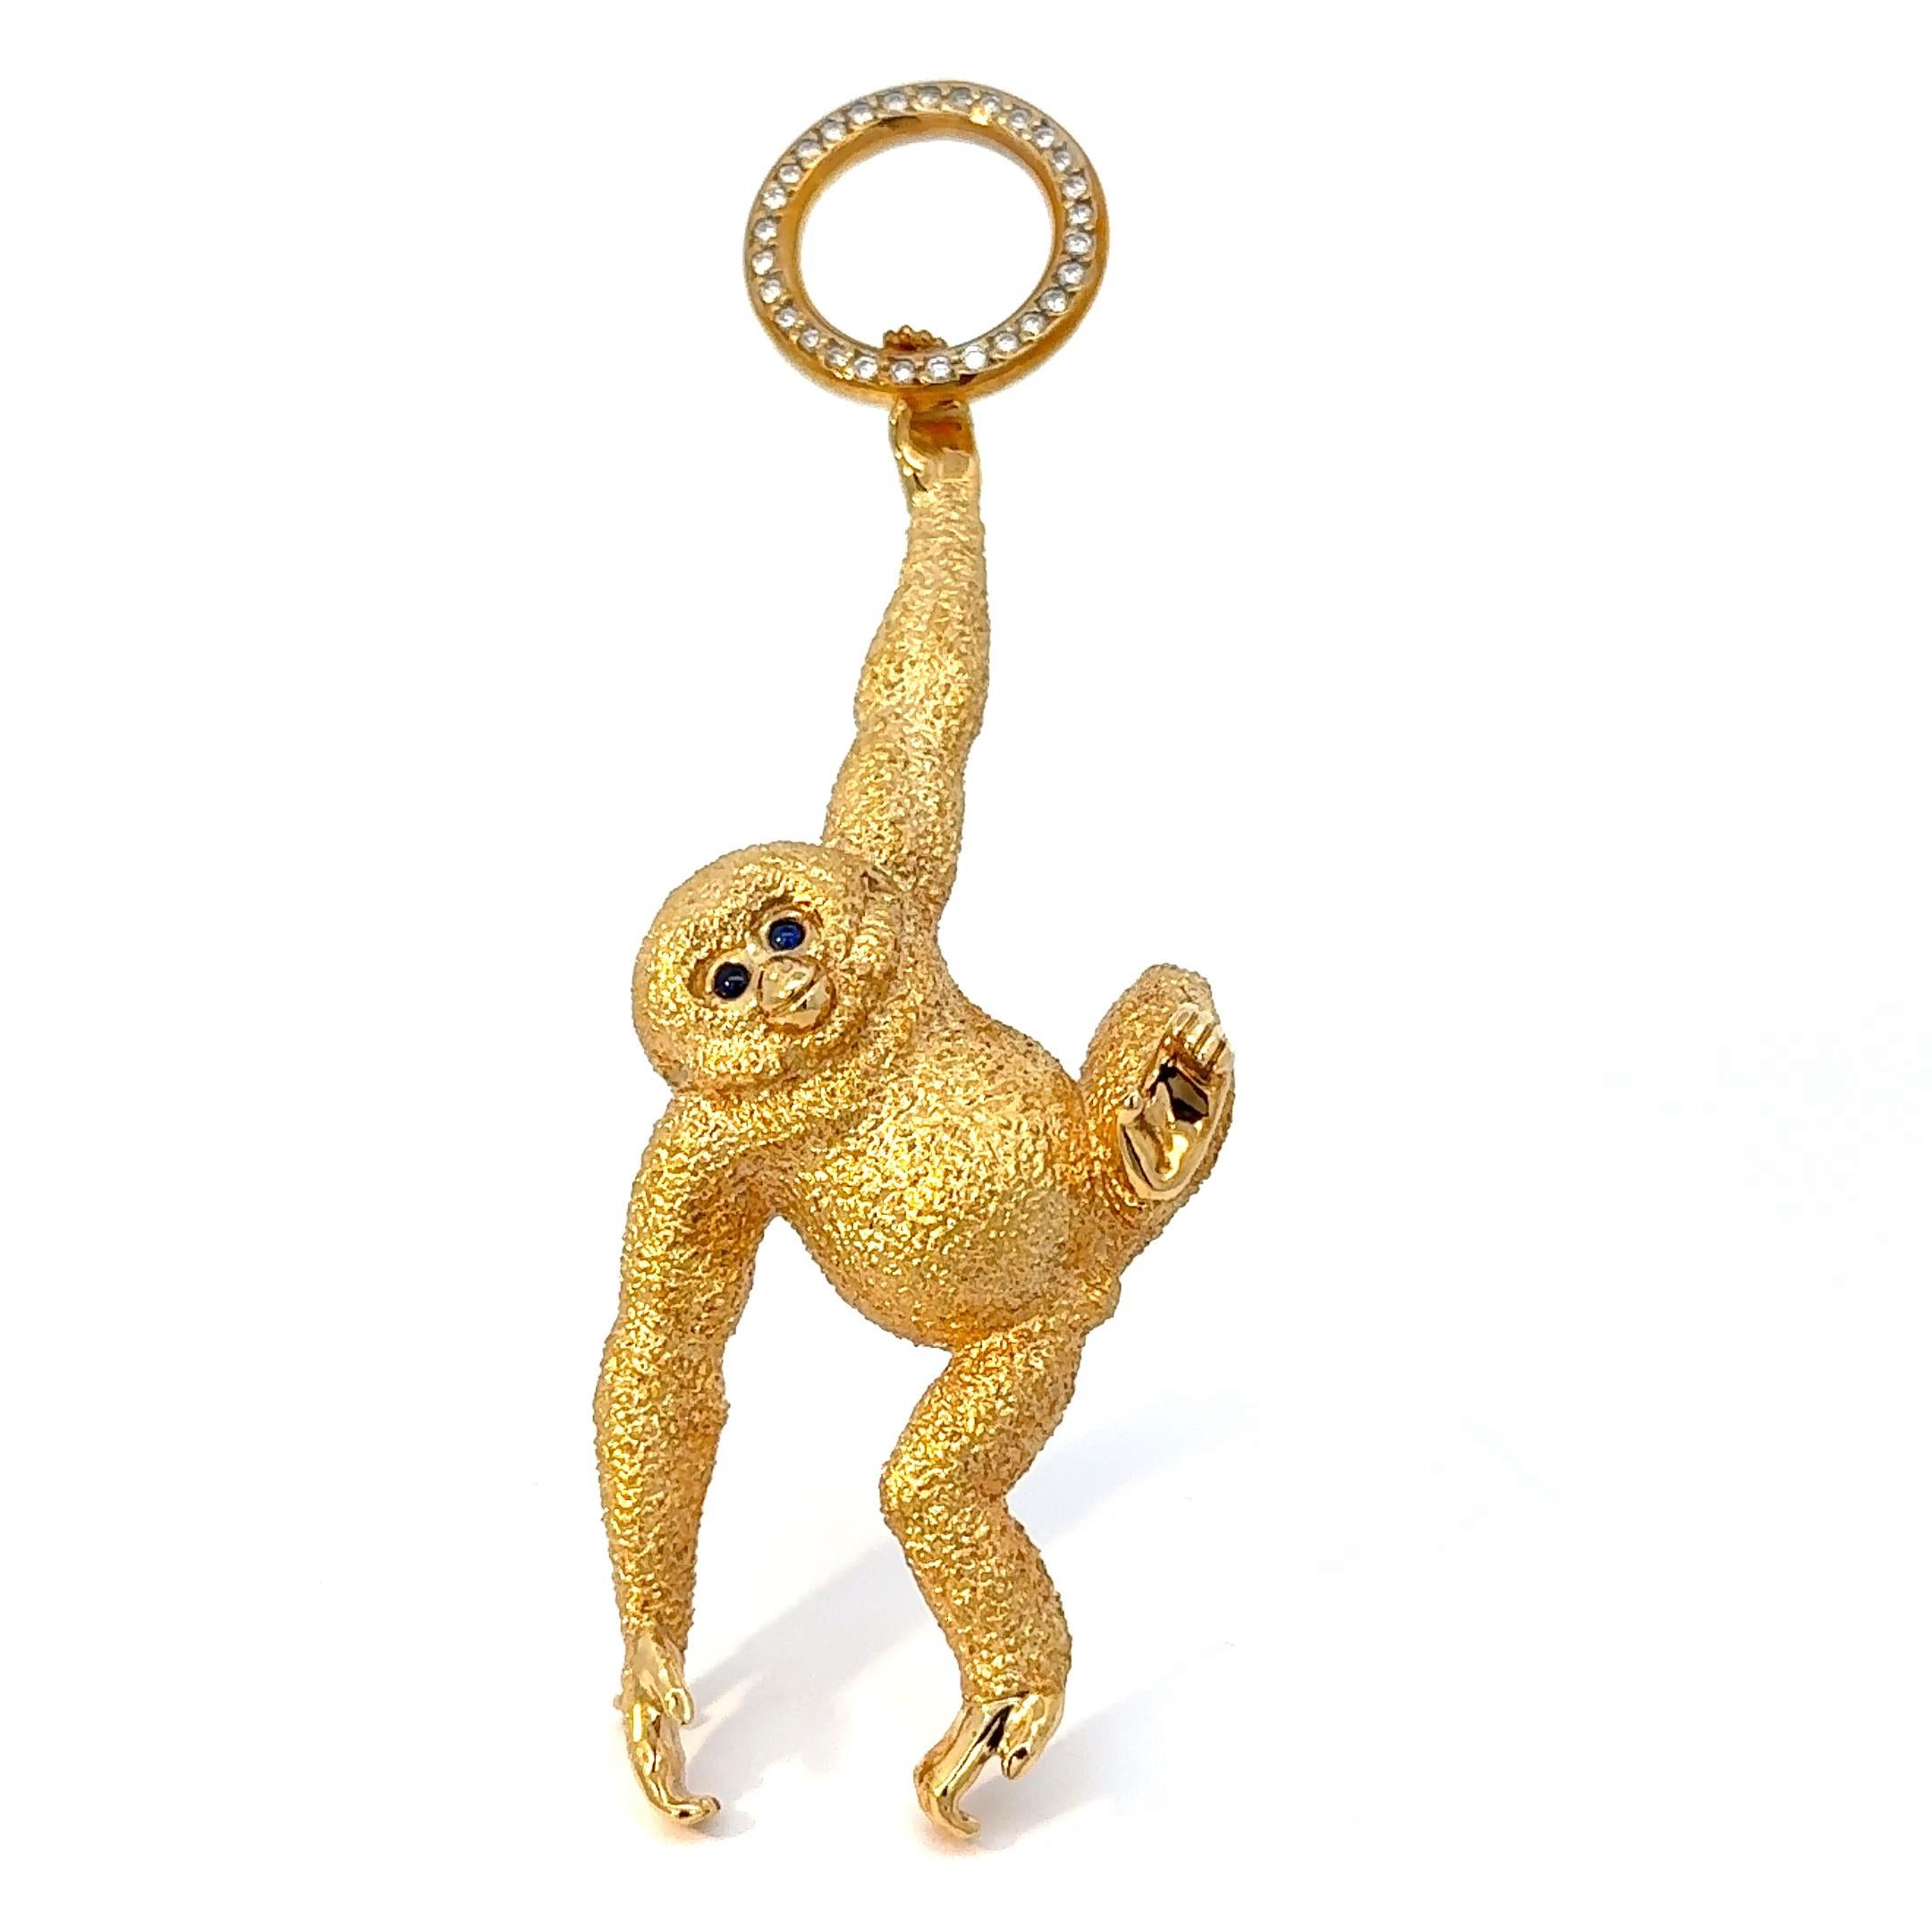 Designed by gemstone-carving-master Alfred Zimmermann, following his designs of his one of a kind gemstones carvings.
This unique brooch has been made in our own goldsmith workshop in Idar-Oberstein. 18ct yellow gold was used by our goldsmiths to